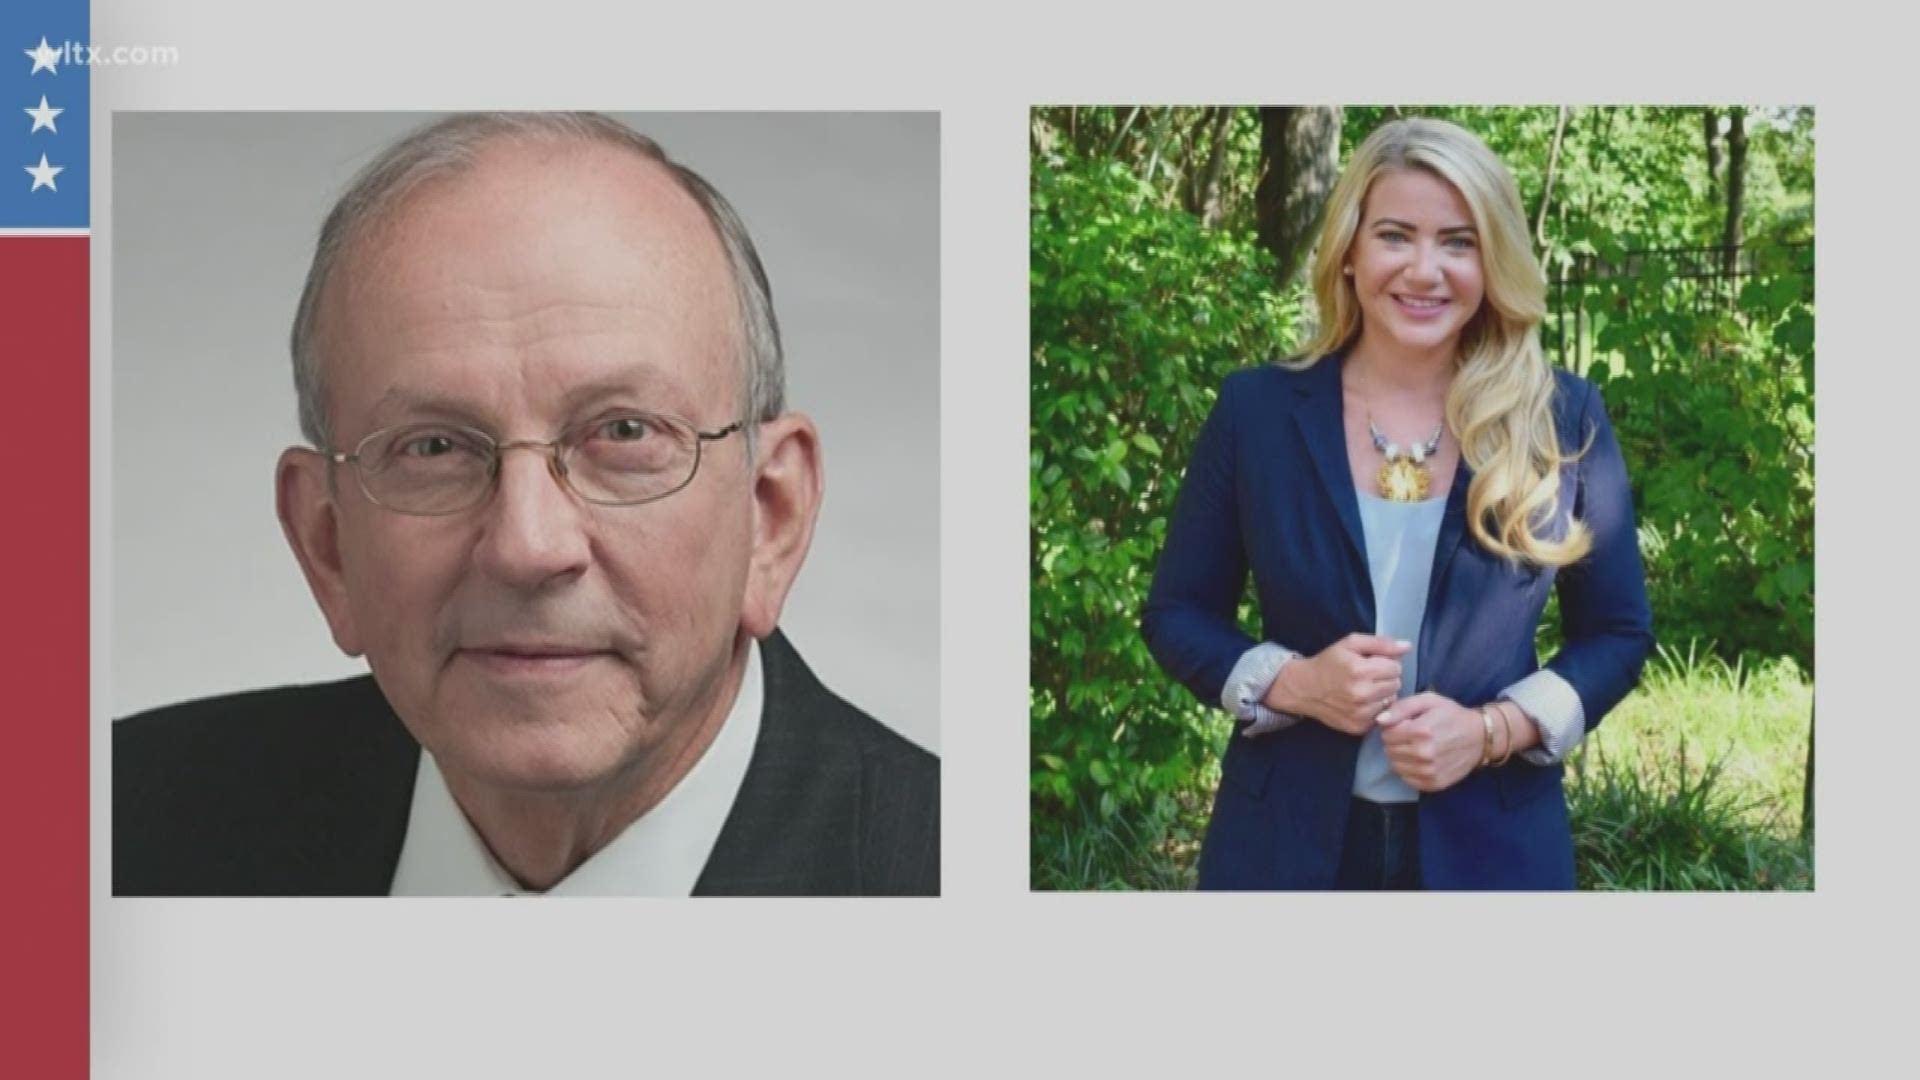 The runoff election for Columbia City Council's at-large seat is between incumbent Howard Duvall and Sara Middleton. The election is set for Tuesday, Nov. 19.